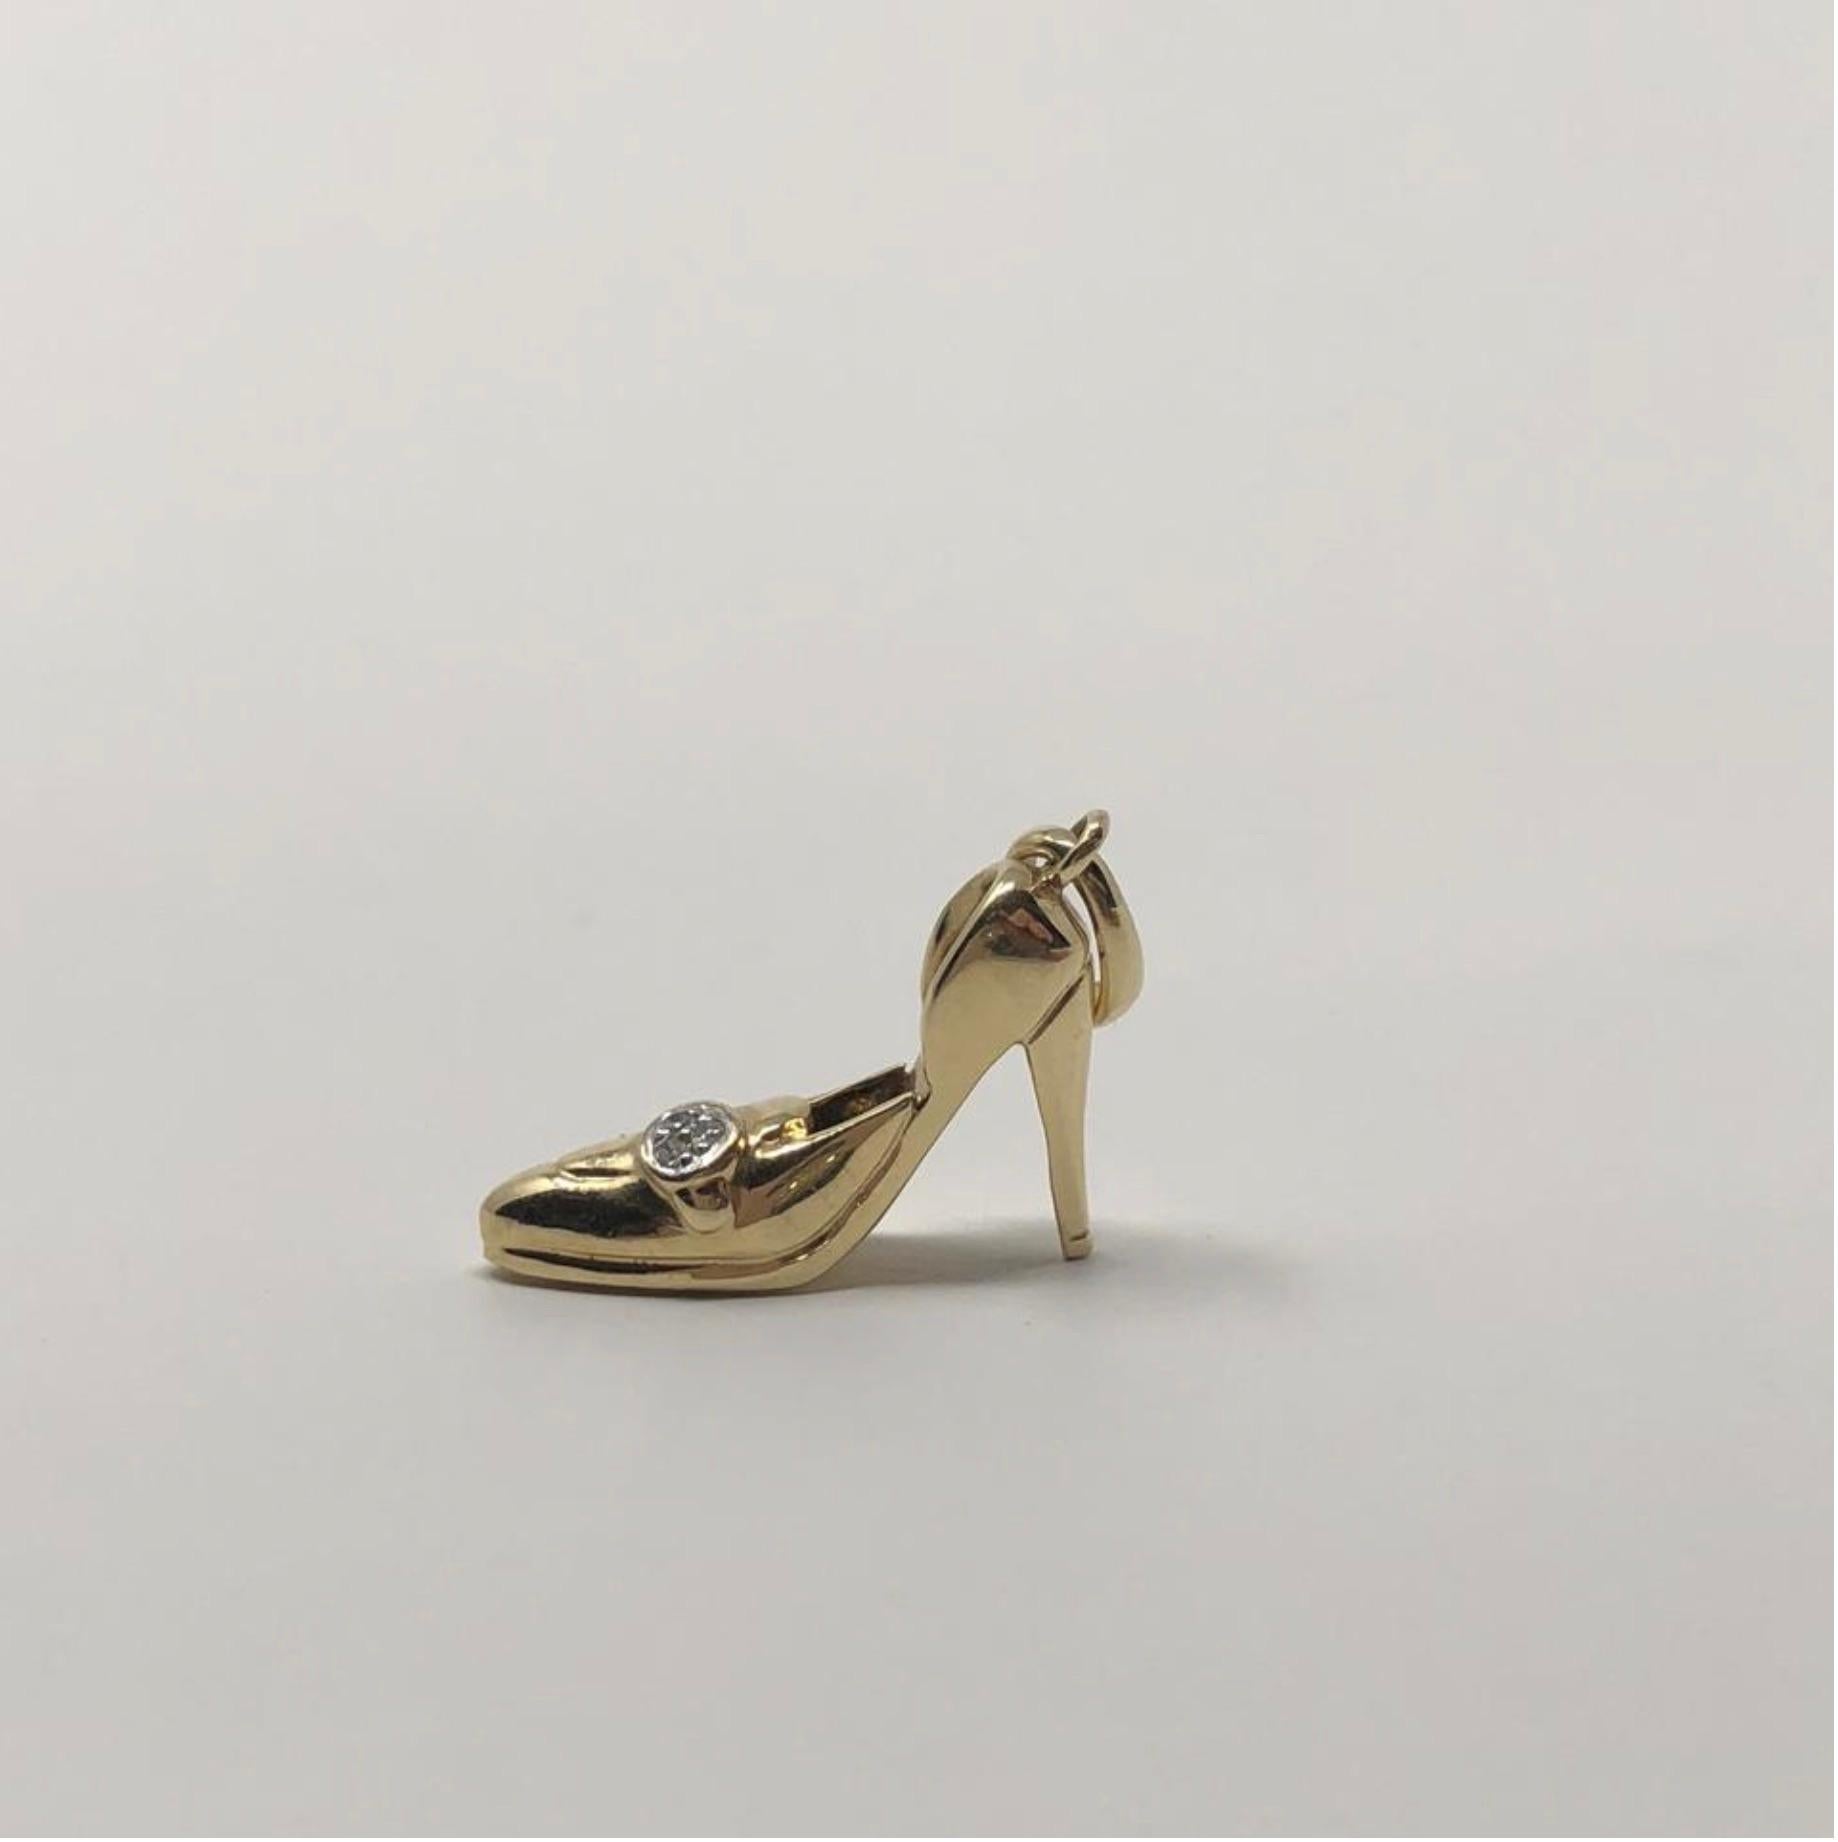 MODEL - Vintage 14k Gold 1/10ct TDW Diamond High Heel Shoe Pendant Charm

CONDITION - Exceptional! No signs of wear.

SKU - 2361-FL

ORIGINAL RETAIL PRICE - 200 + tax

MATERIAL - 14k Gold

WEIGHT - 2.5 grams

DIMENSIONS - L.25 x H.75 (1 with bail) x